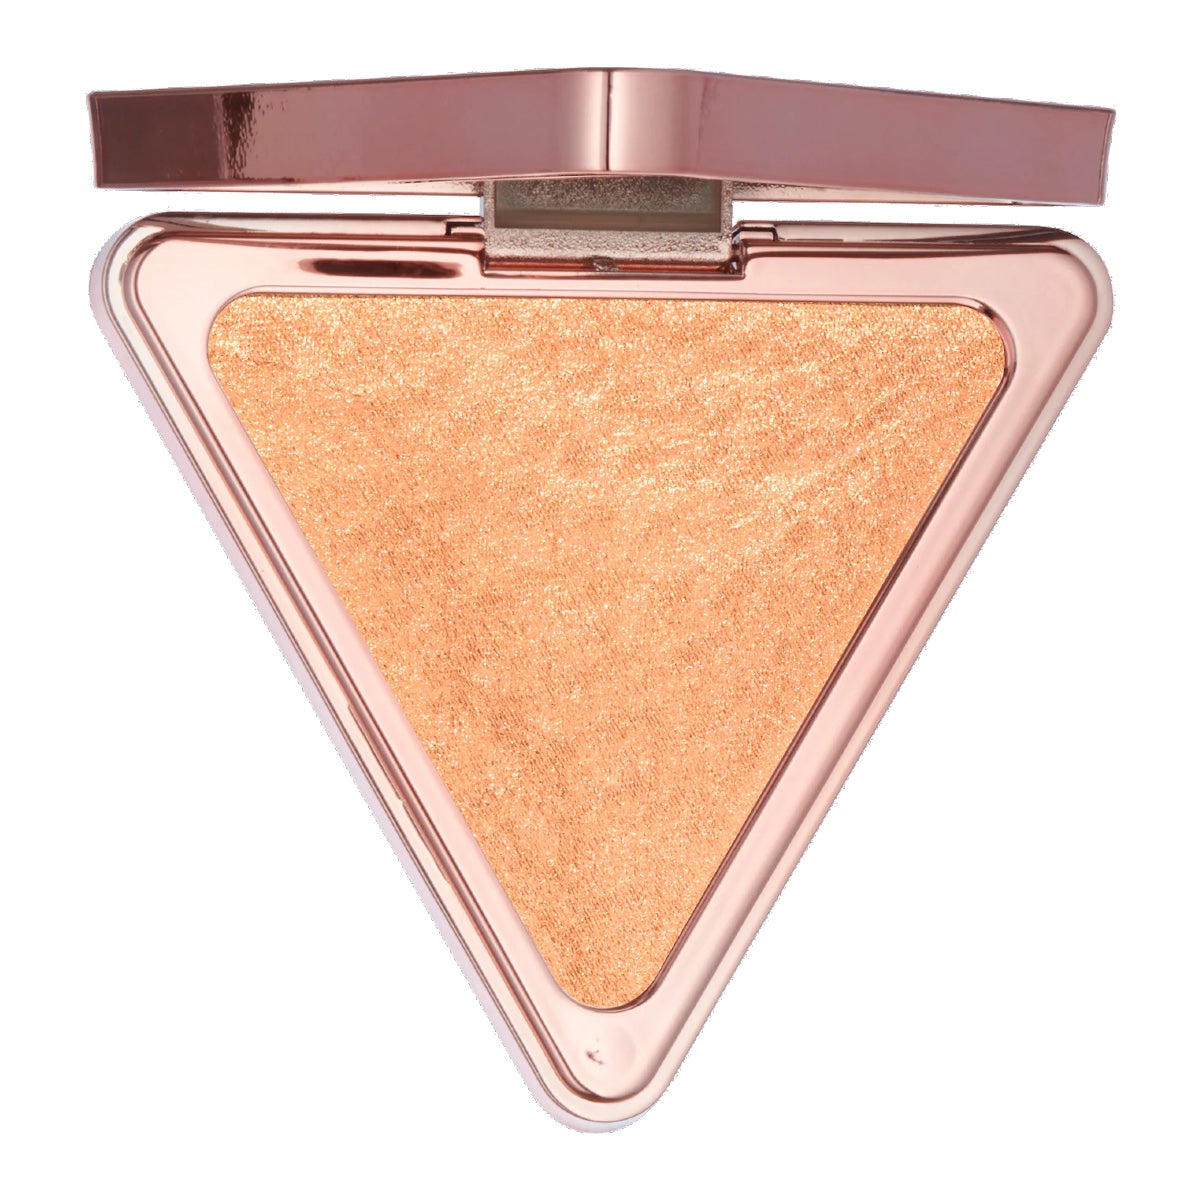 LYS Beauty Aim High Pressed Highlighter Powder | Brave (Champagne)